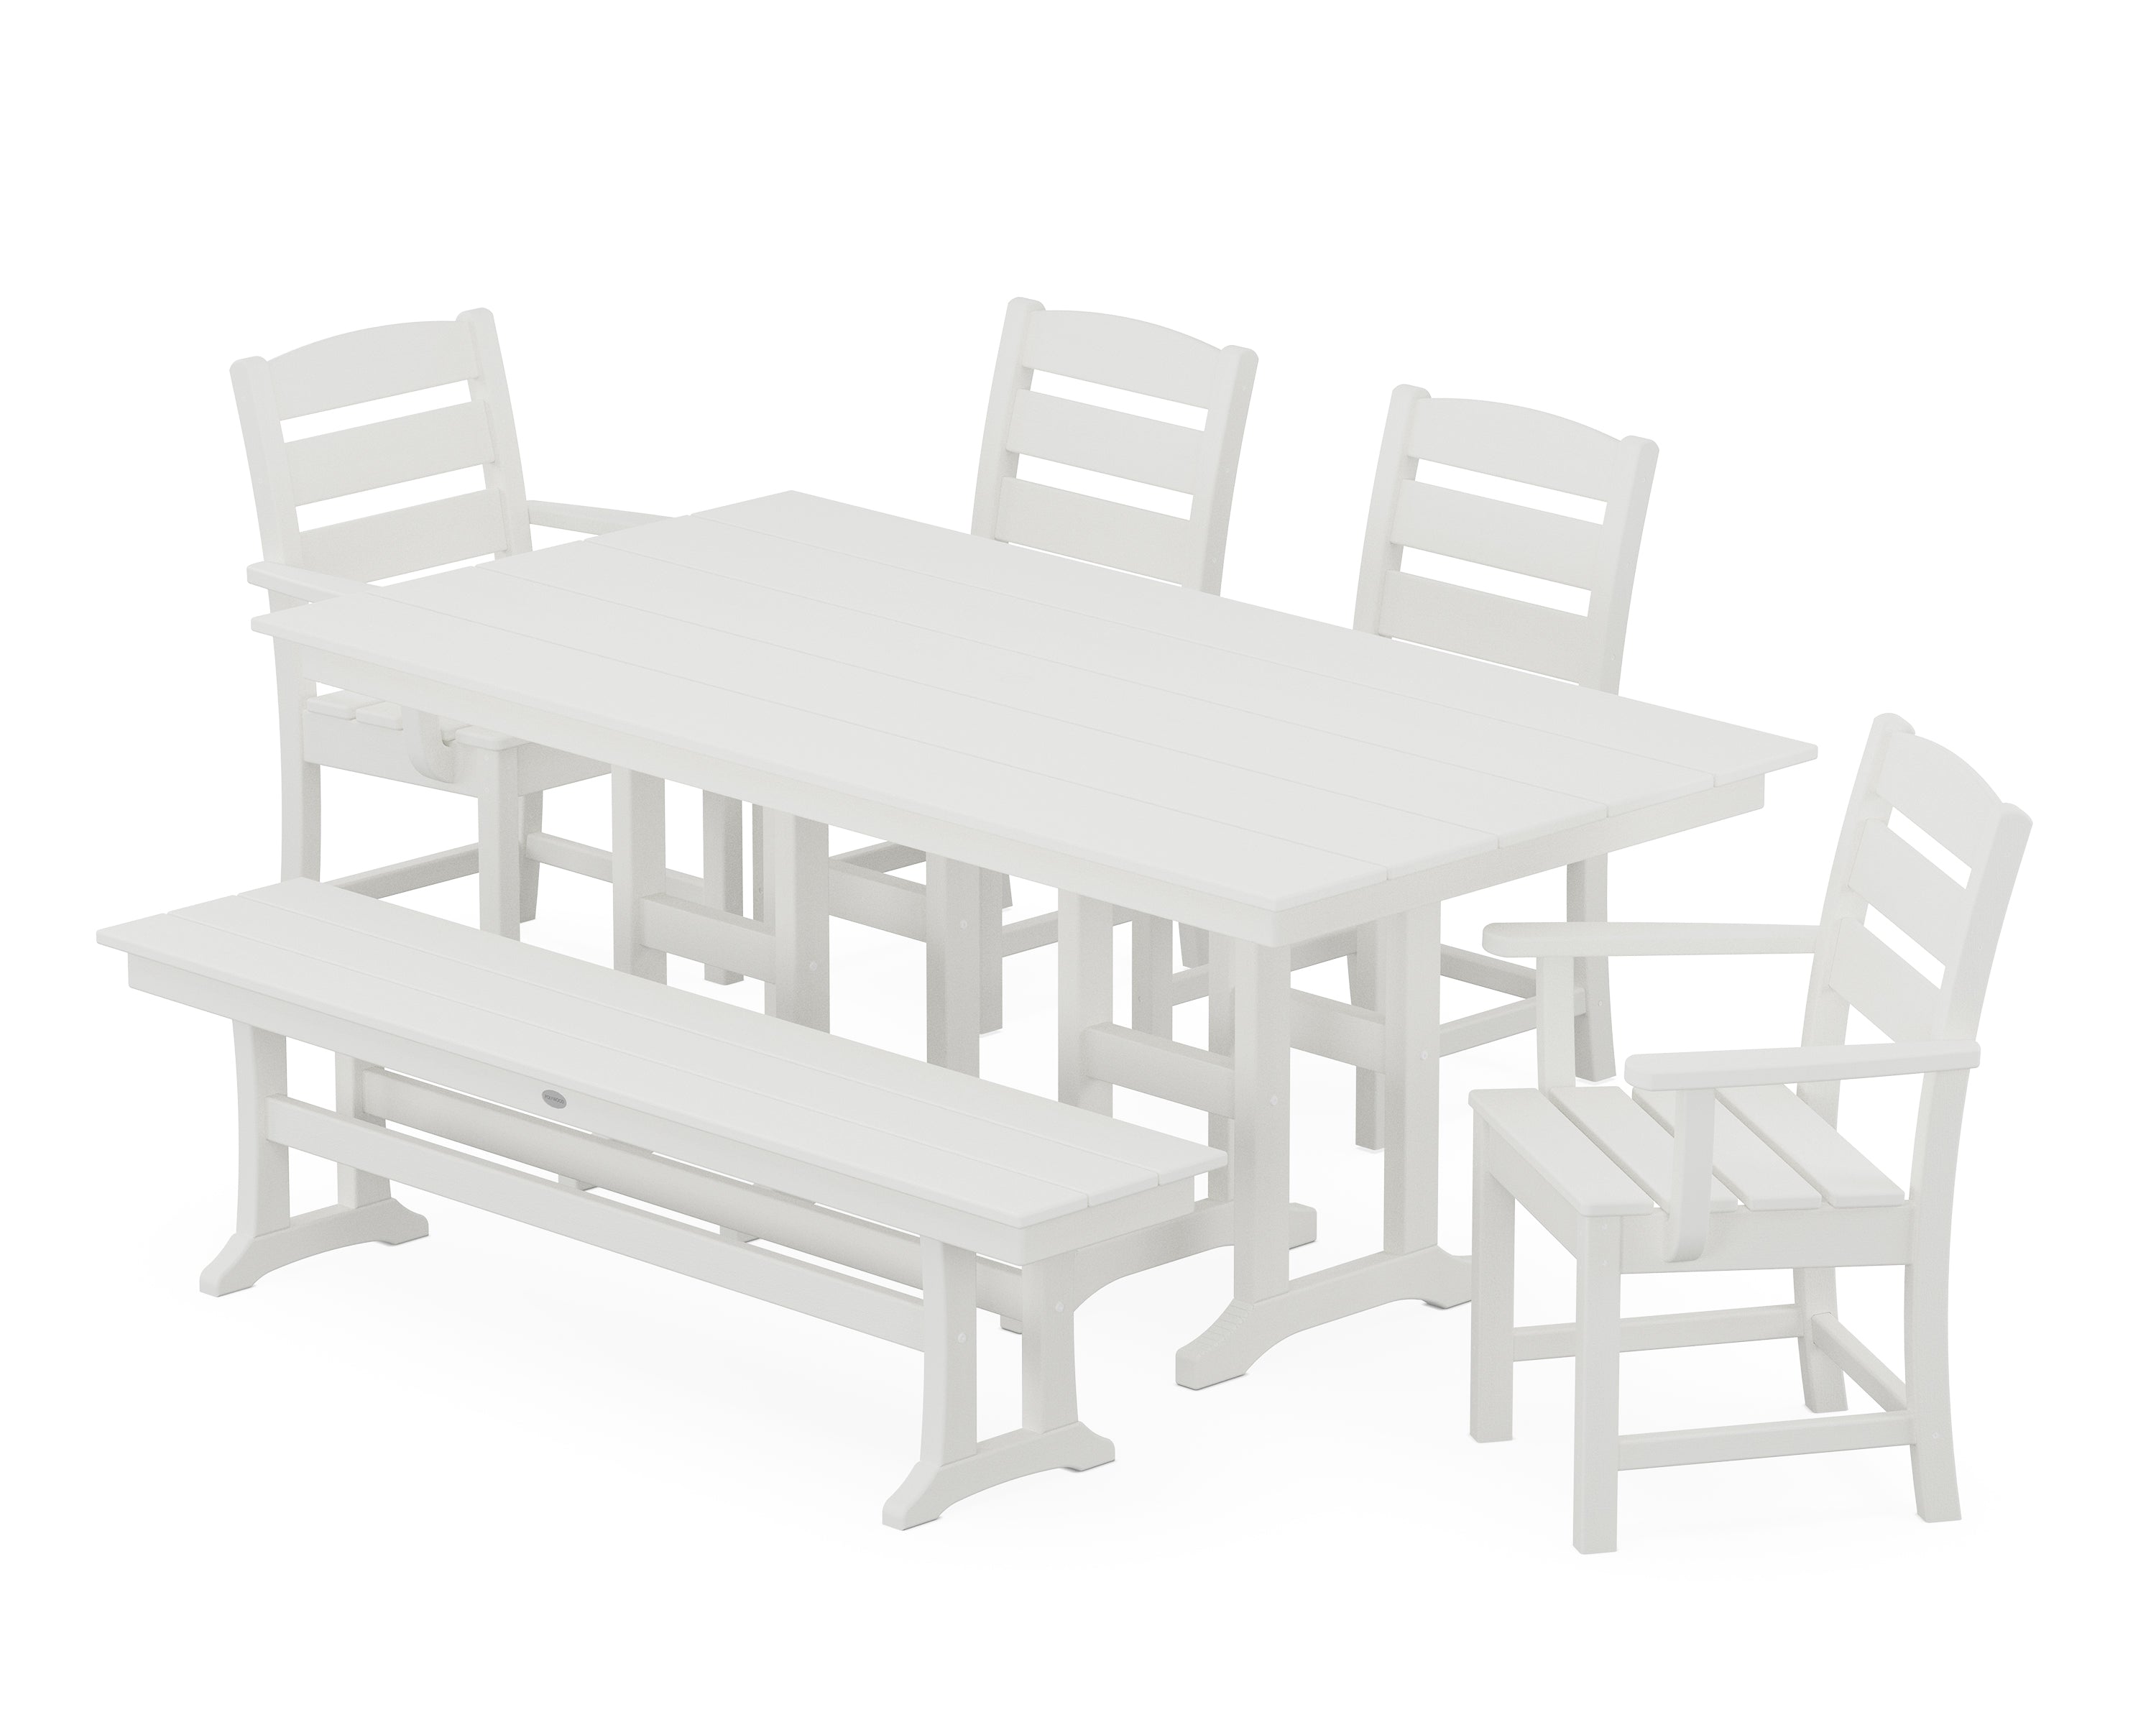 Lakeside 6-Piece Farmhouse Dining Set with Bench